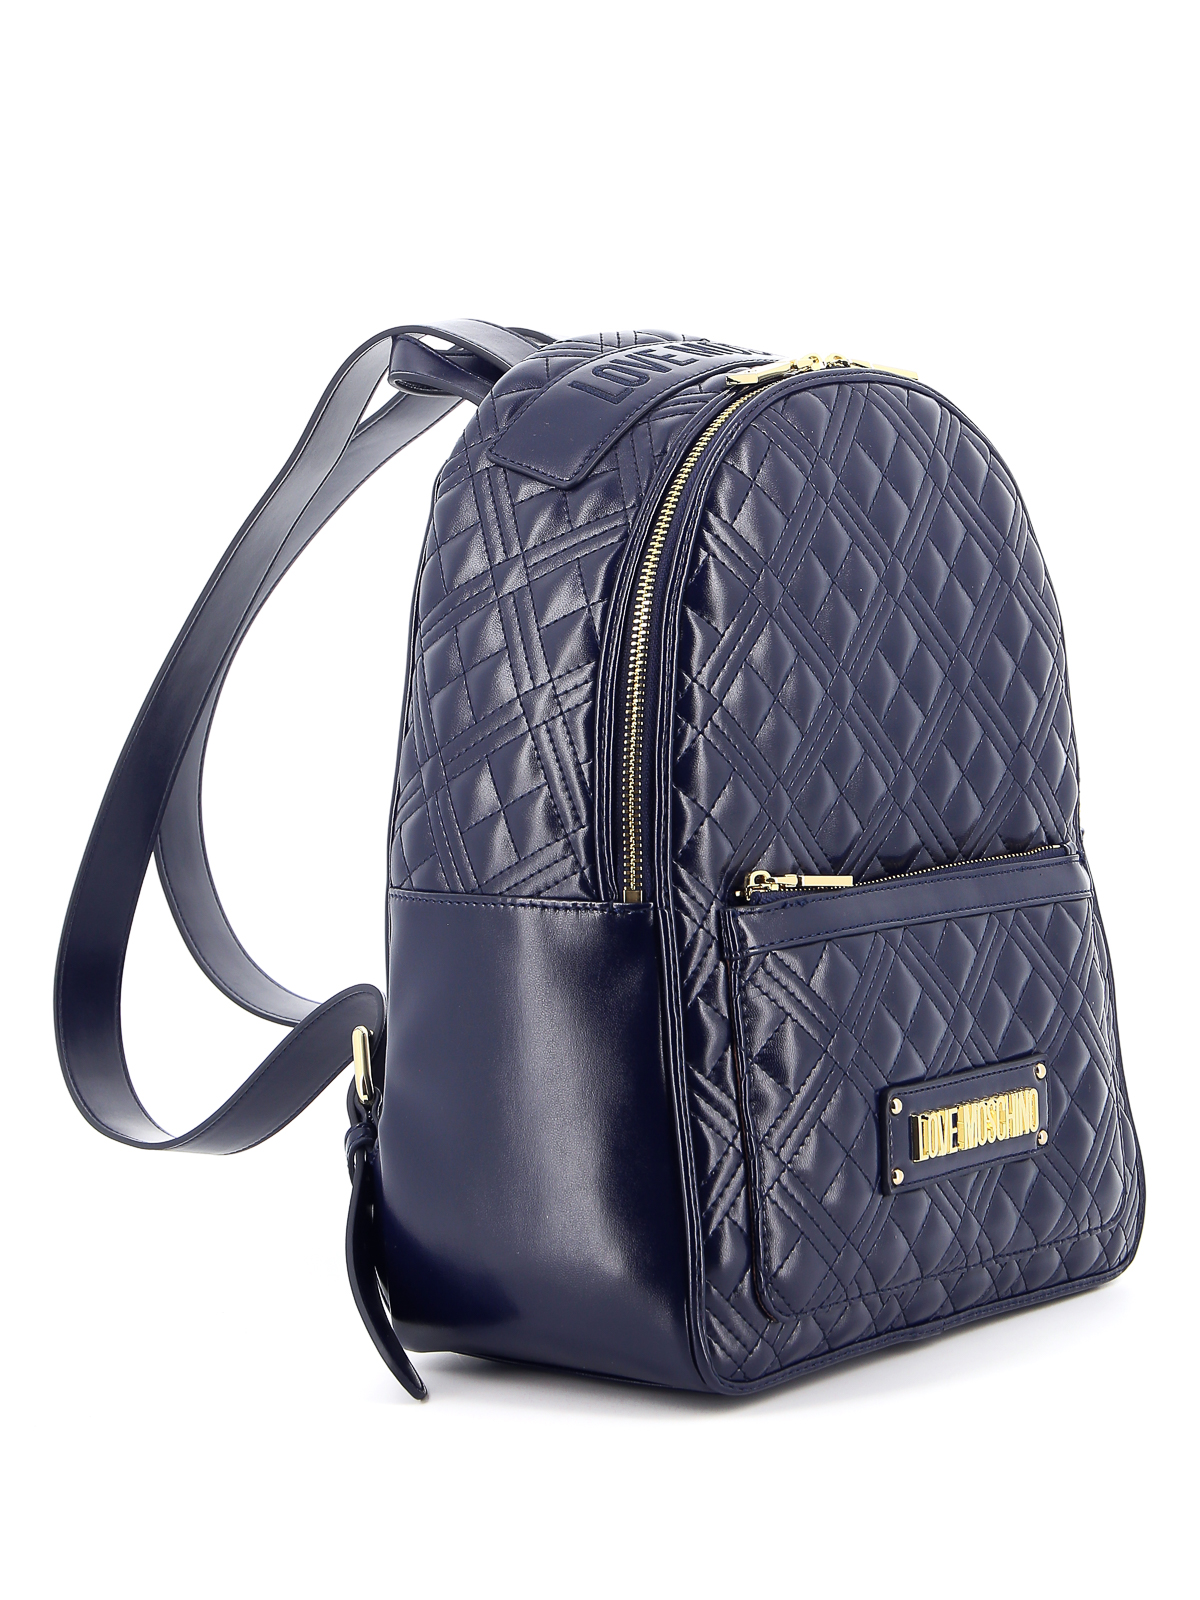 love moschino quilted backpack